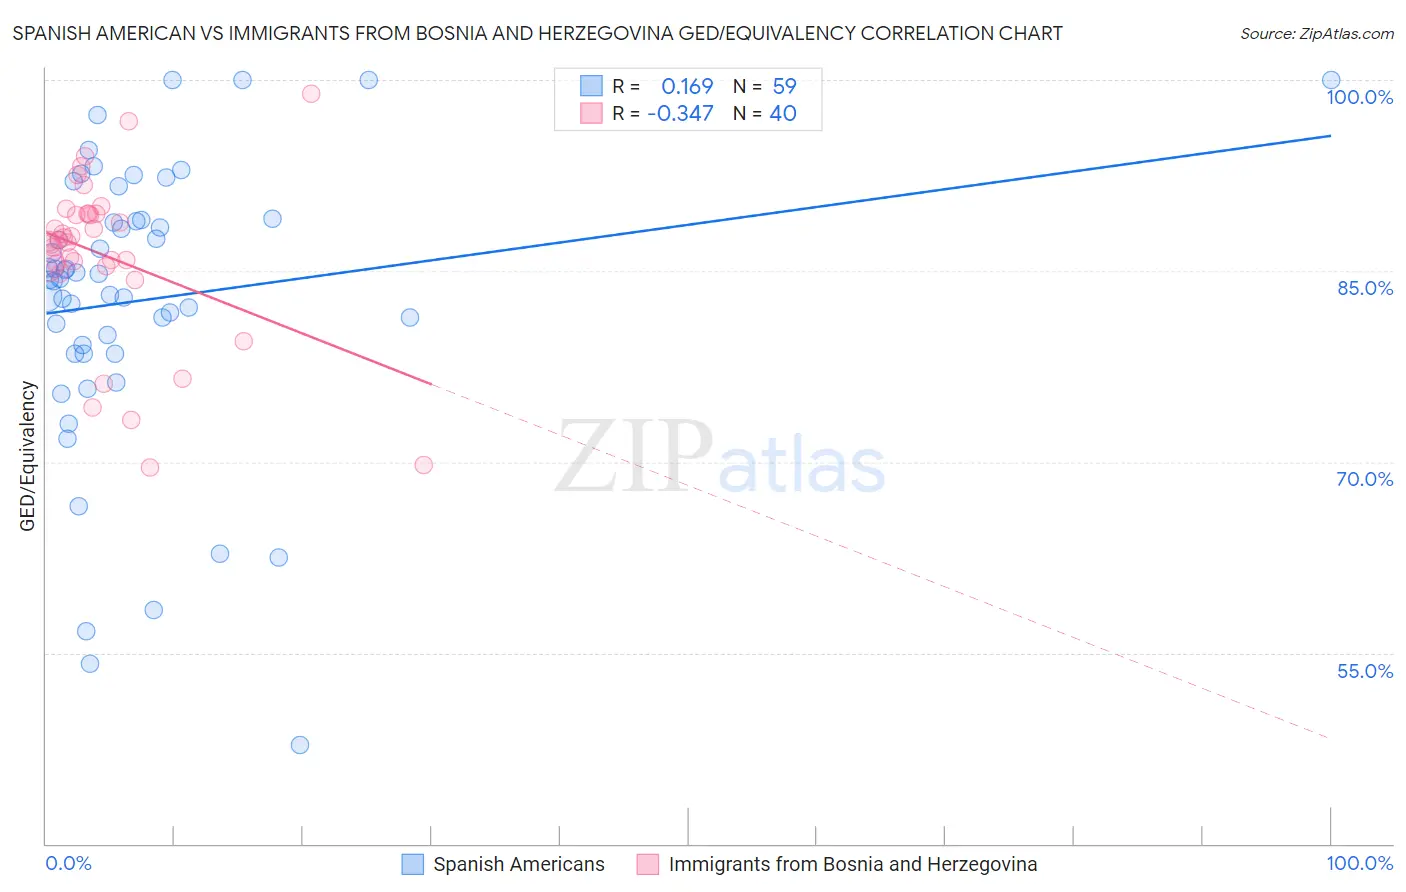 Spanish American vs Immigrants from Bosnia and Herzegovina GED/Equivalency